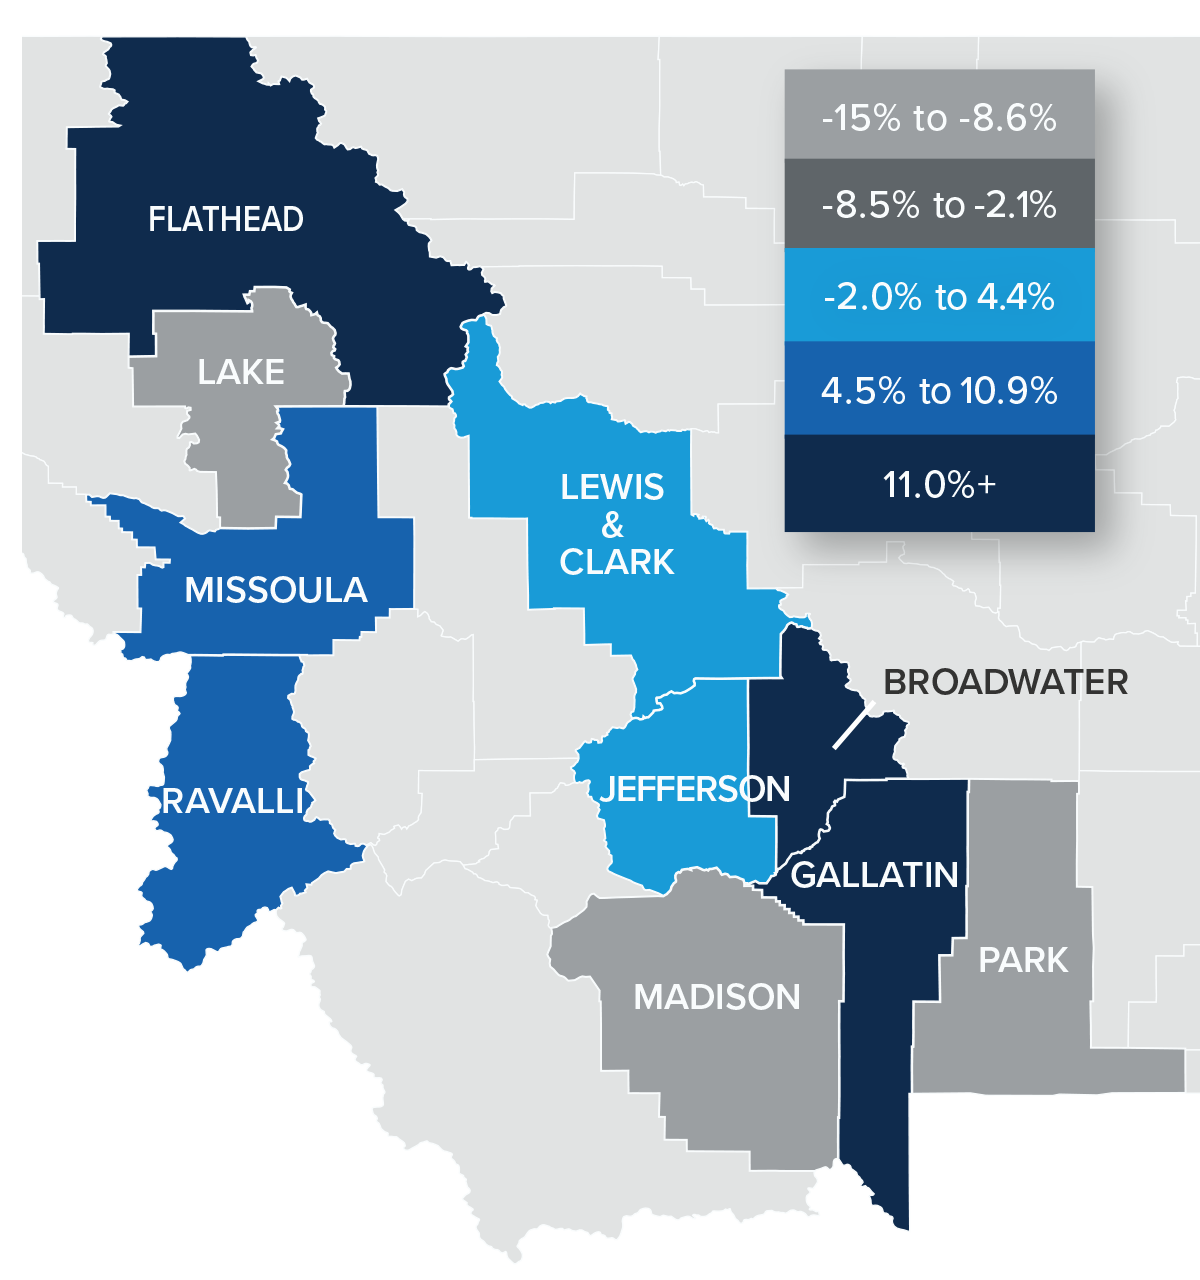 A map showing the real estate home prices percentage changes for various counties in Montana. Different colors correspond to different tiers of percentage change. Flathead, Broadwater, and Gallatin had changes greater than 11% and are represented in the corresponding navy color. Missoula and Ravalli were in the 4.5-10.9% range. Lewis & Clark and Jefferson were in the -2 to 4.4% range. Madison, Park, and Lake Counties were in the -8.6 to -15% range and are represented in the light grey color on the map.